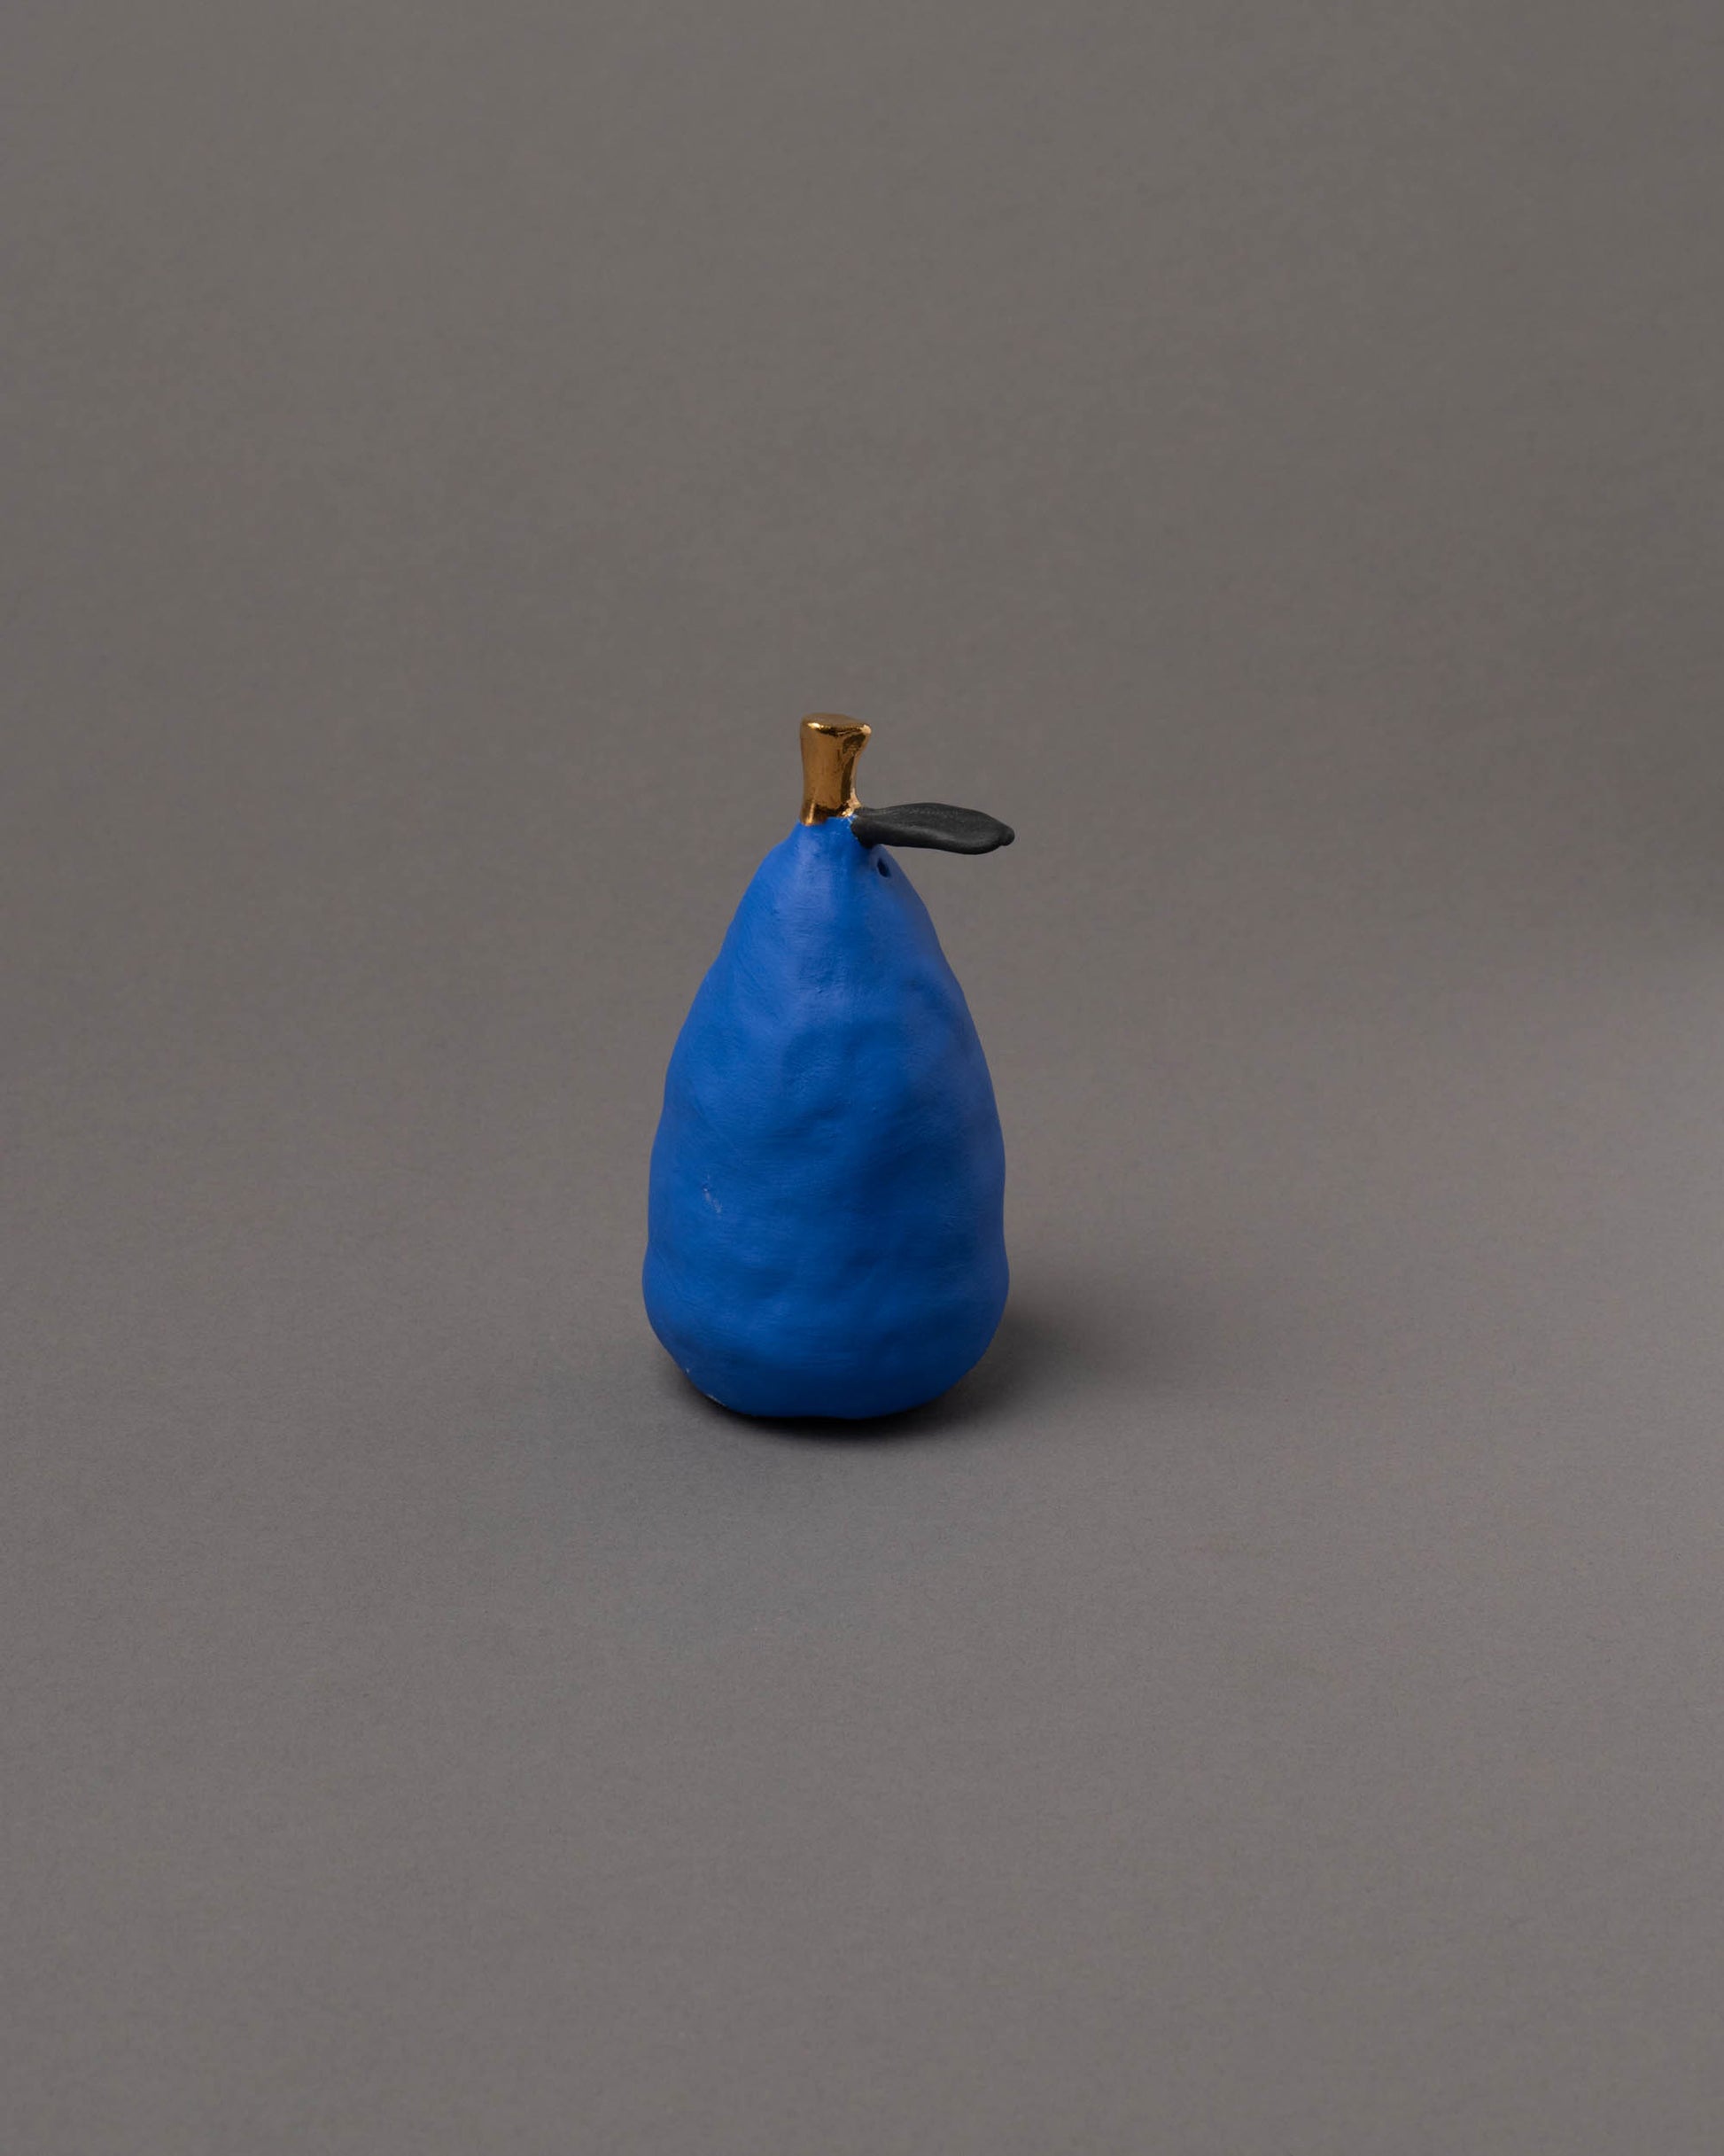 Suzanne Sullivan Blue Pear Considering Utility Objects on light color background.